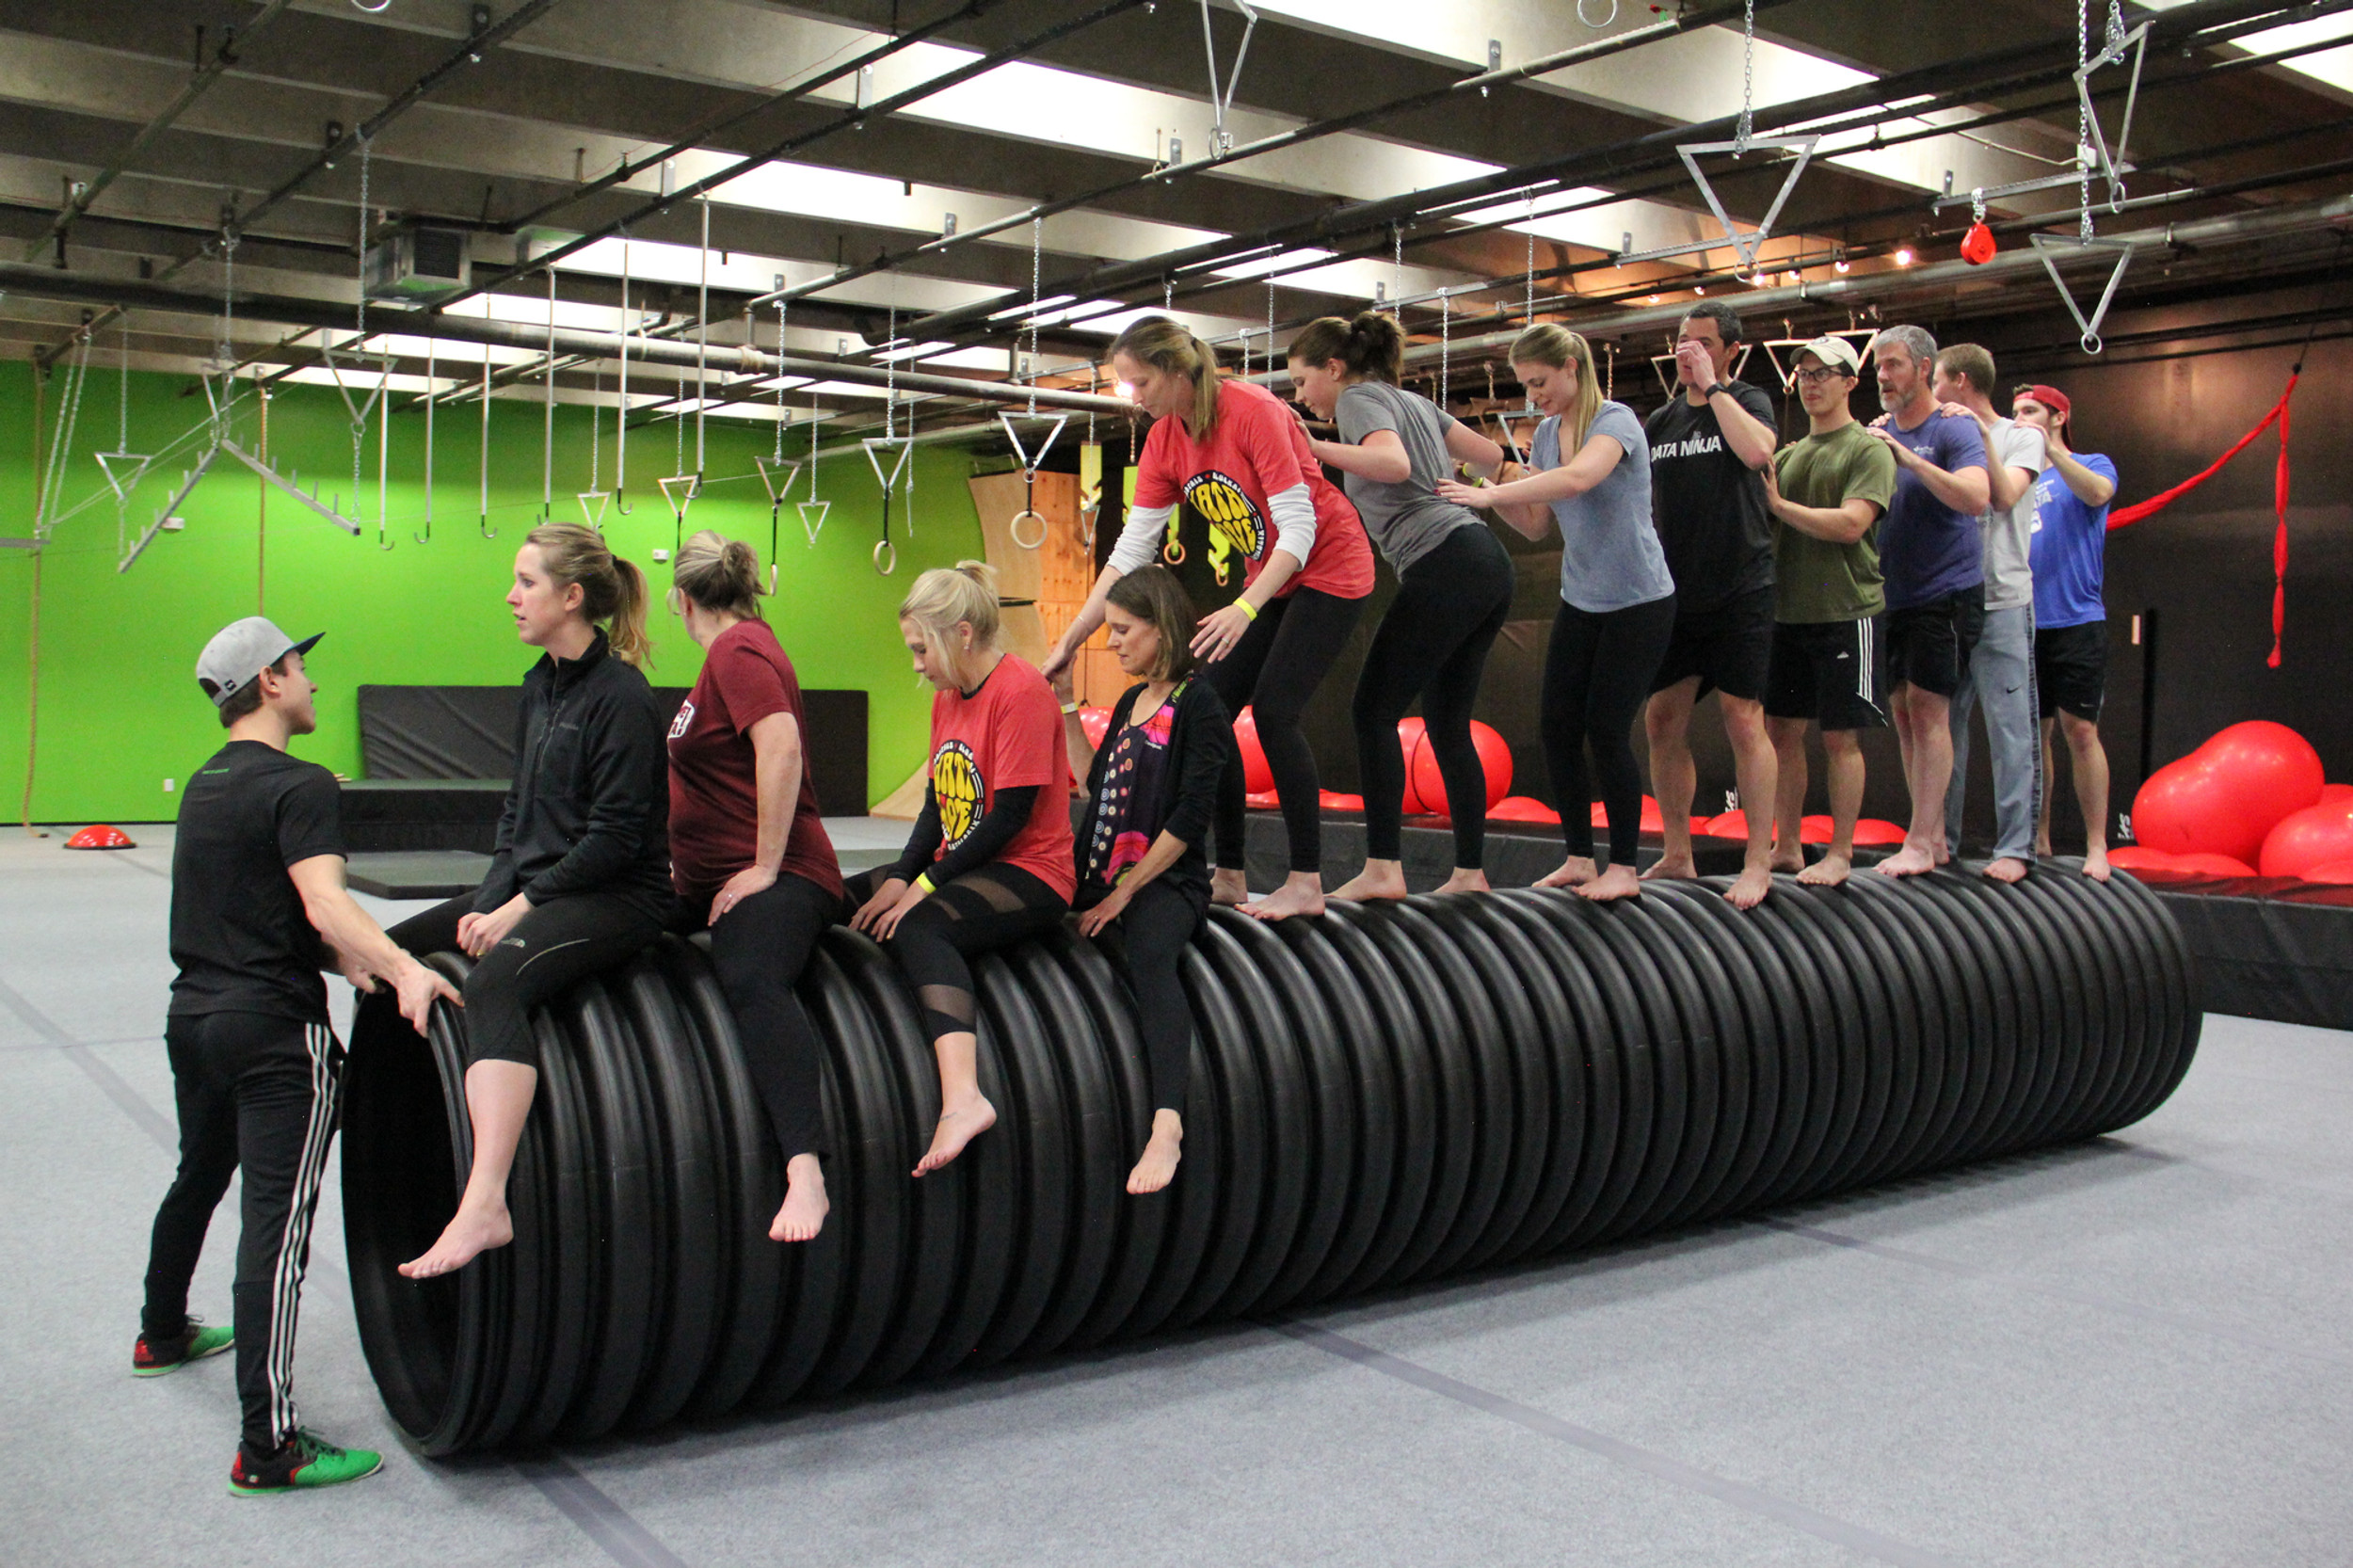 A corporate group at Warrior Challenge Arena, one of the best Denver team building activities in winter 